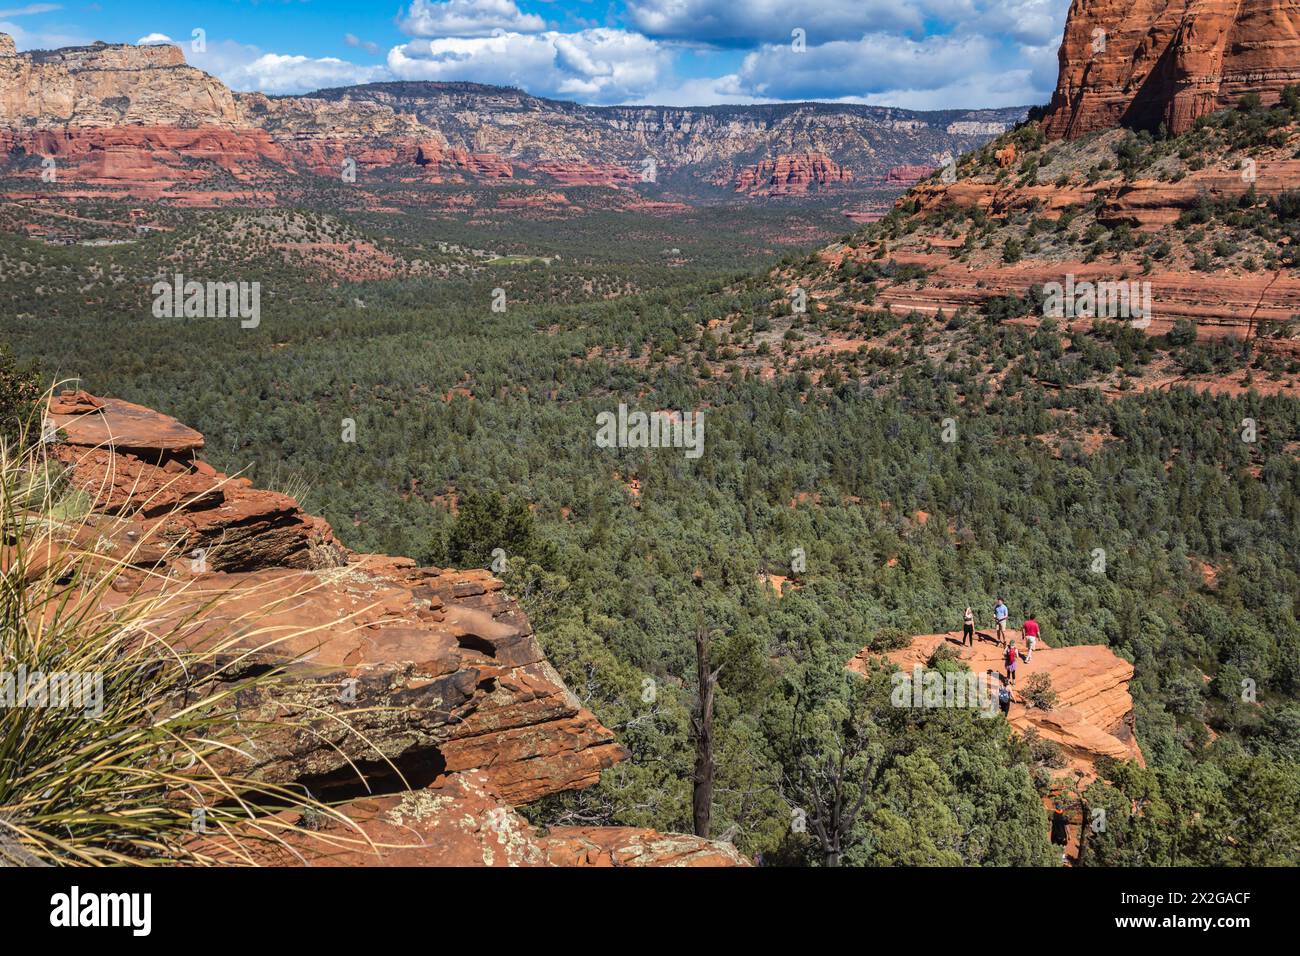 Hikers climb to the top of a red rock sandstone formation along the Devil's Bridge Trail in Sedona, Arizona Stock Photo